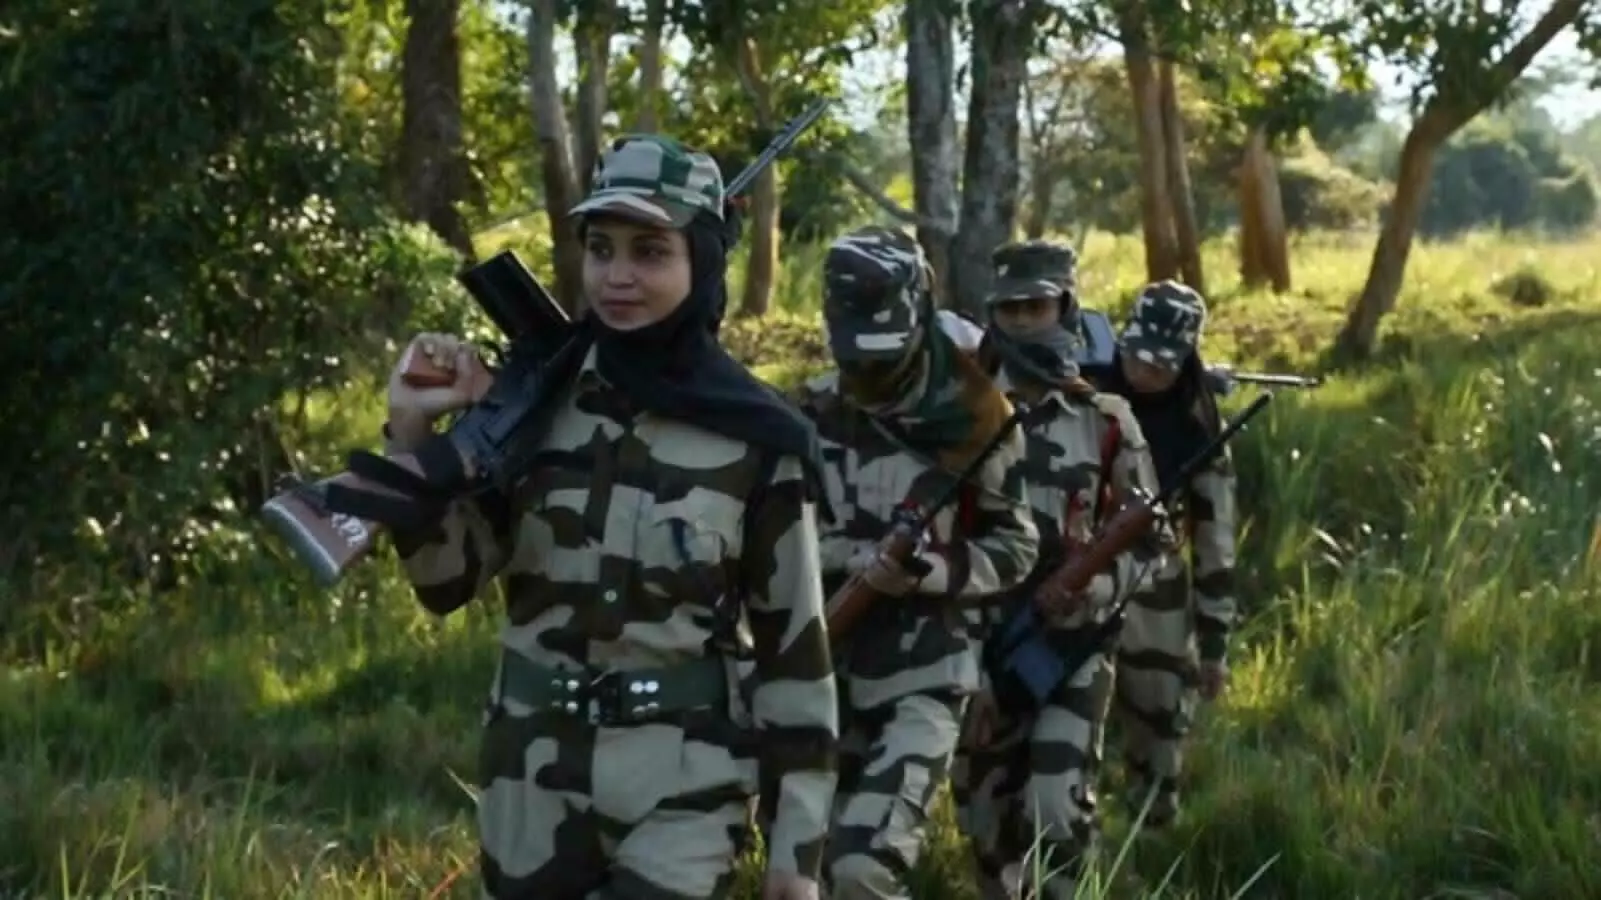 women bsf guards deployment first time in sundarbans forests and rivers area in west bengal